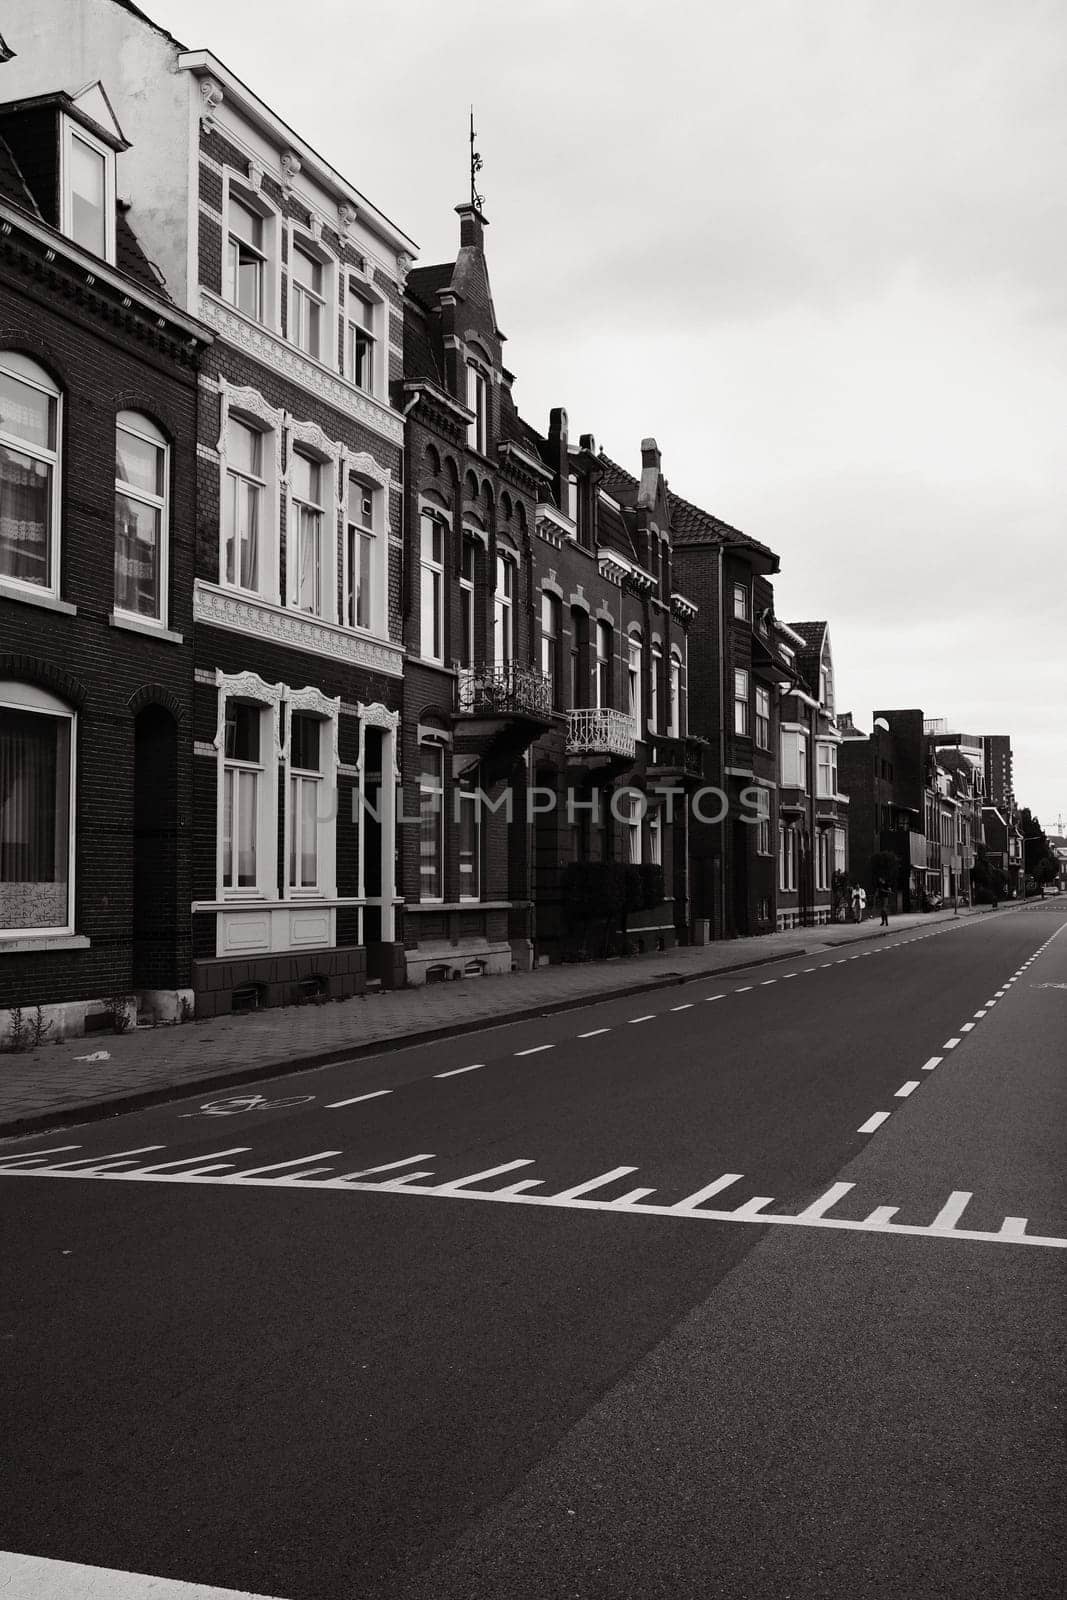 Grayscale, vertical shot of a typical street with small townhouses in Venlo, Netherlands.